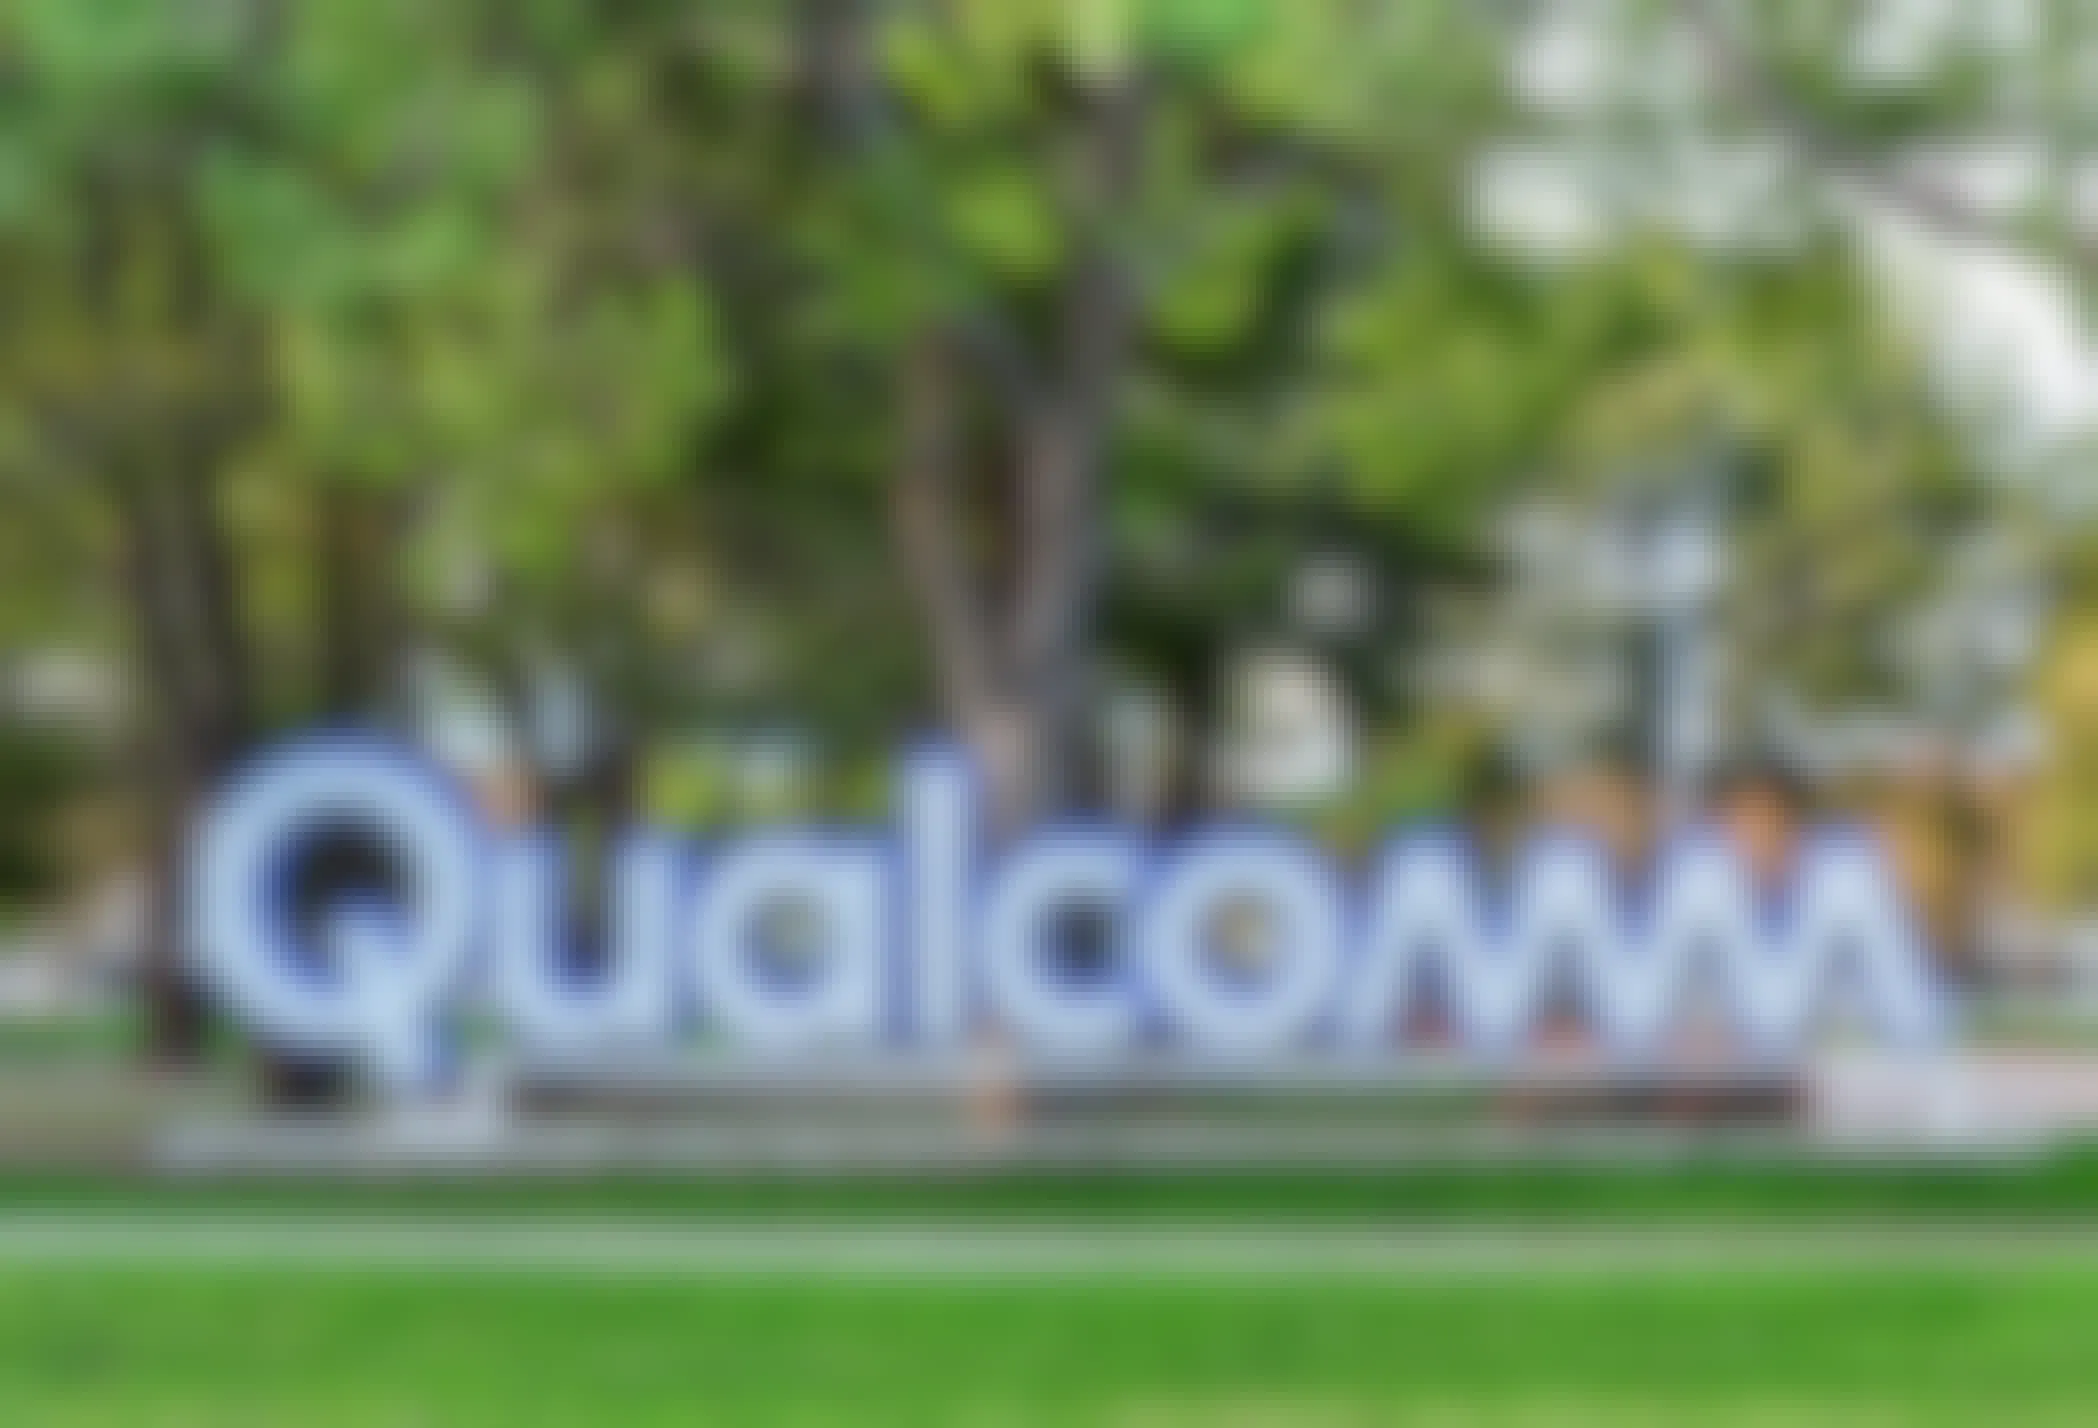 Qualcomm sign near Qualcomm Research Silicon Valley office